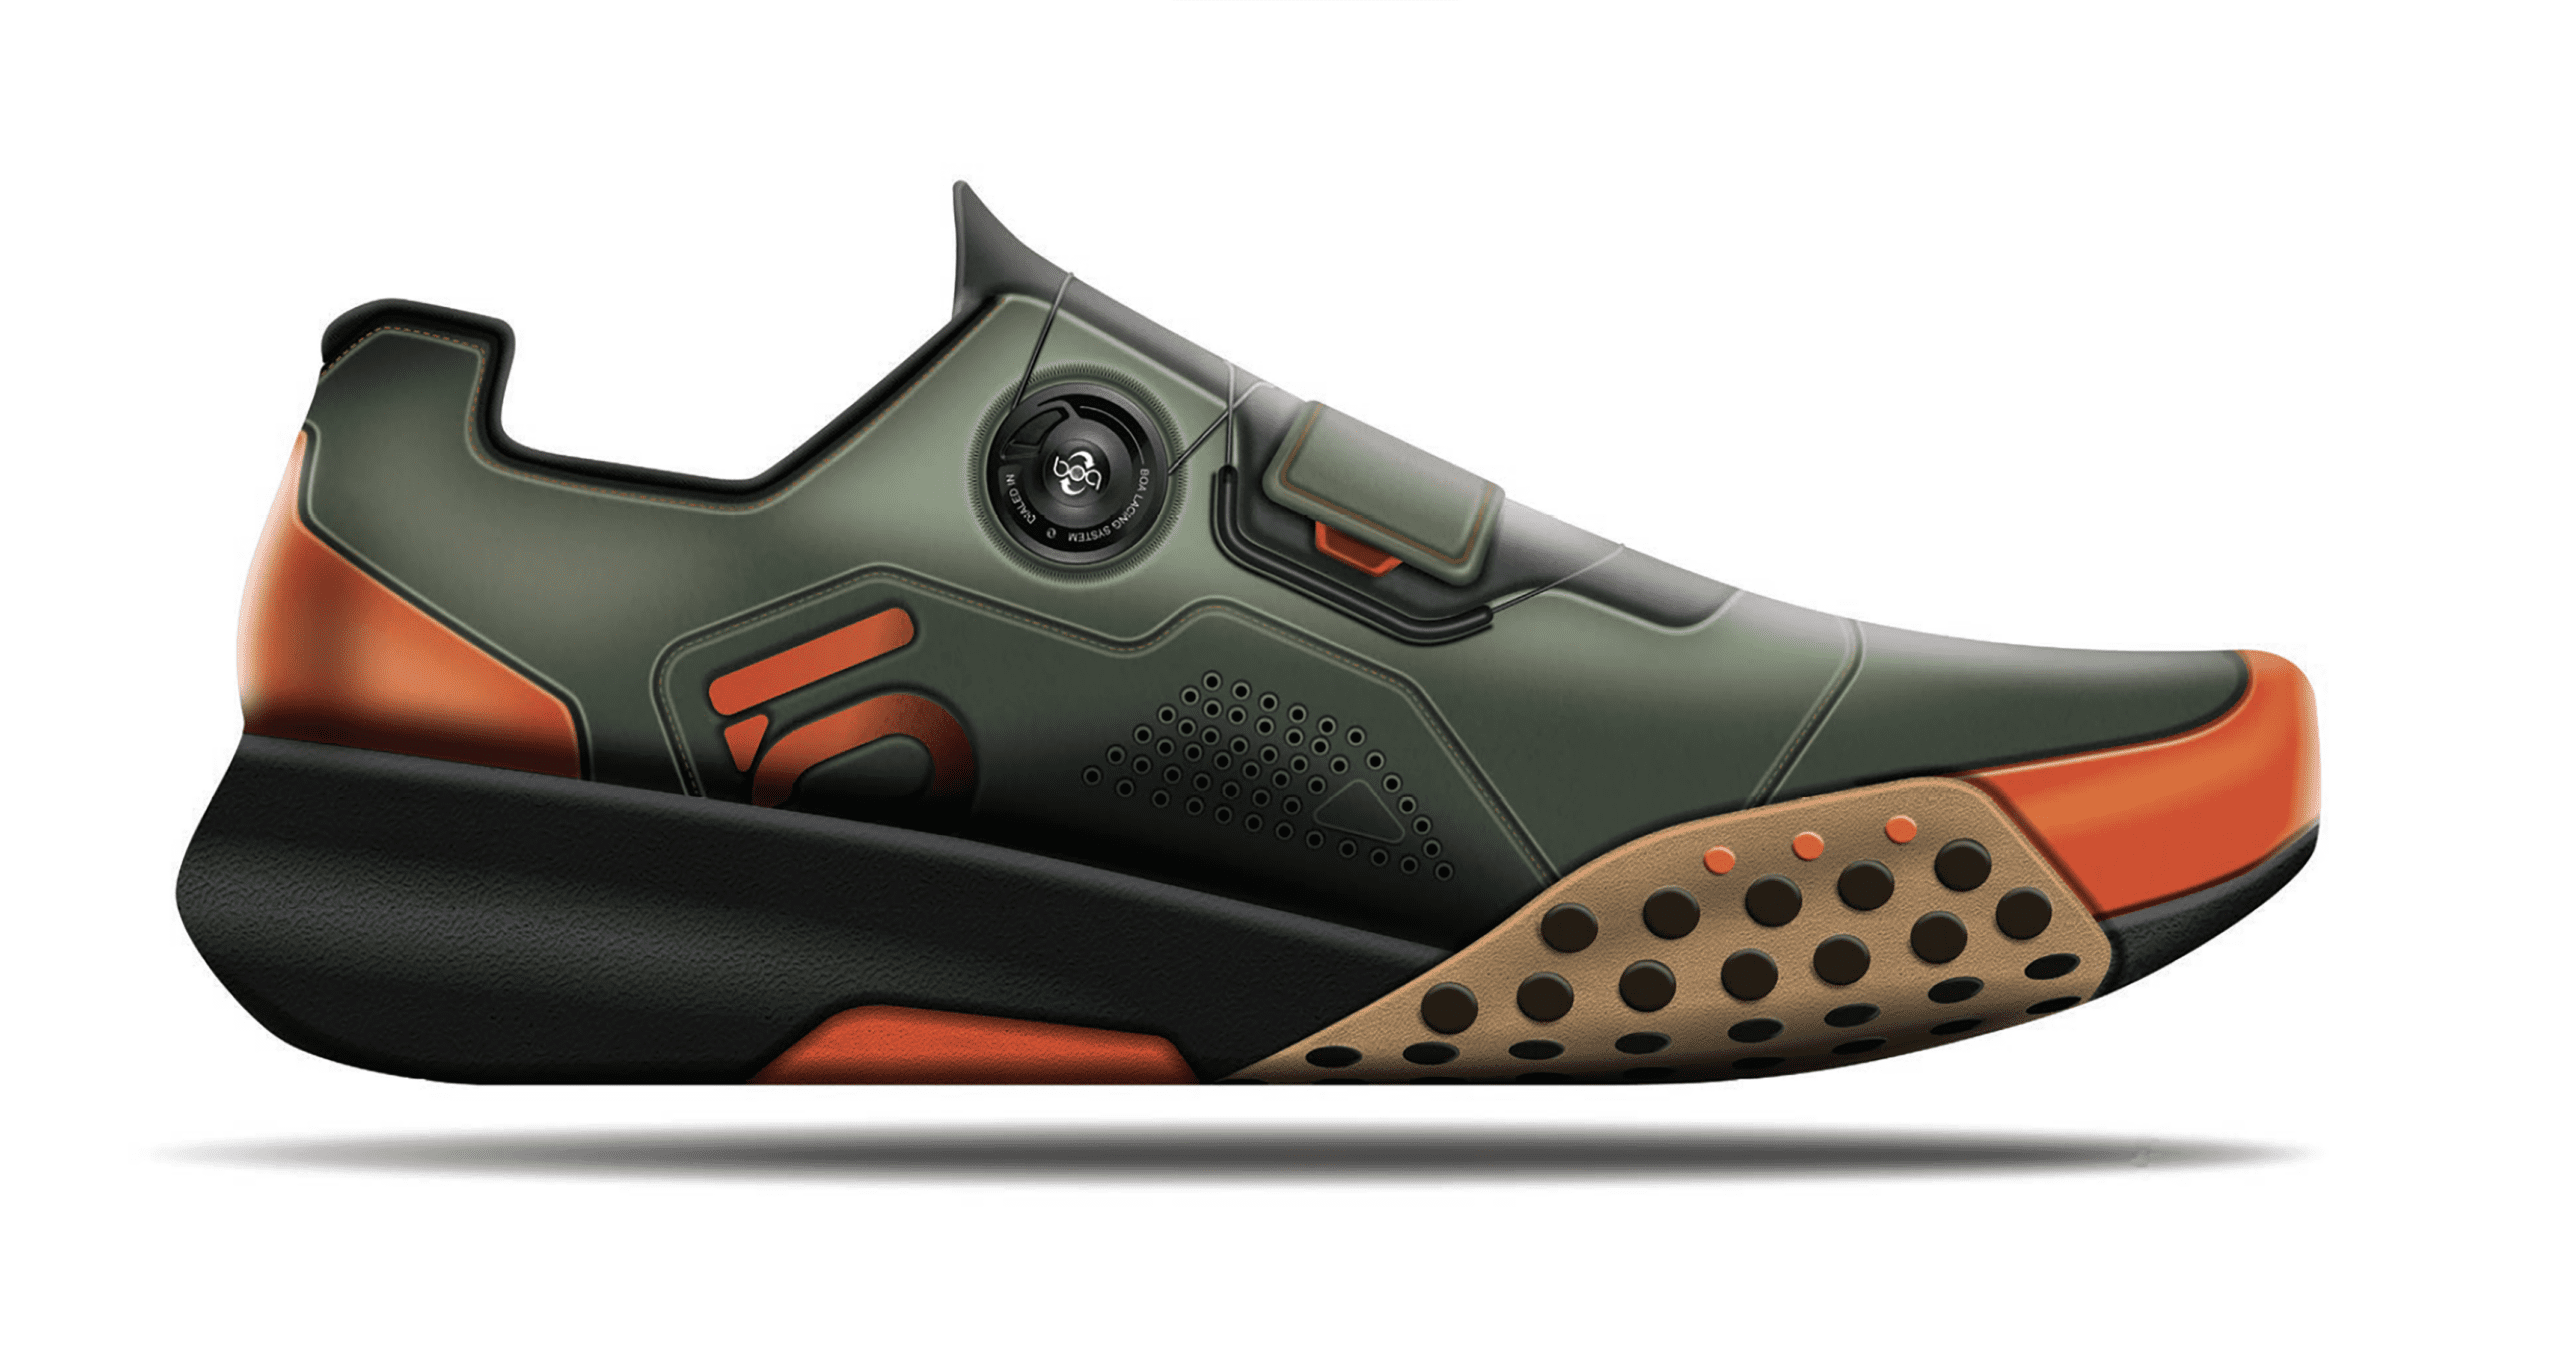 Digital image of a MTB show floating slightly in the air on a white background. The shoe is dark green with a black and gold bottom, and orange detailing on the toes and heel. The side of the shoe has an orange logo.